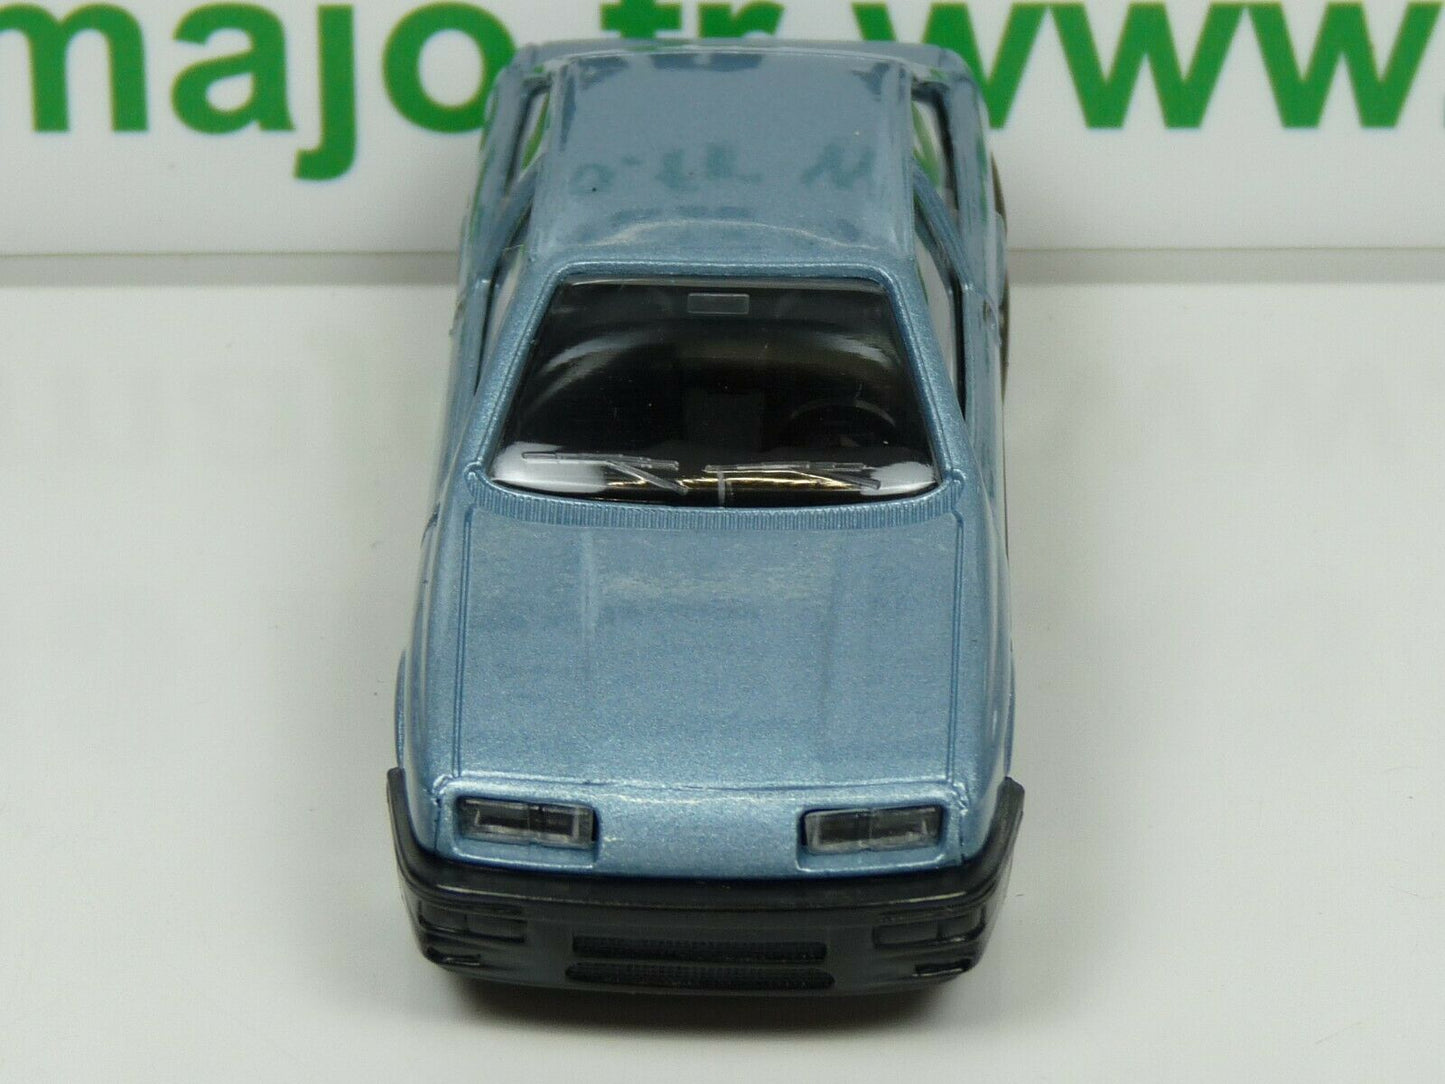 SOL21 Voiture 1/43 solido (Made in France) FORD Sierra XR4